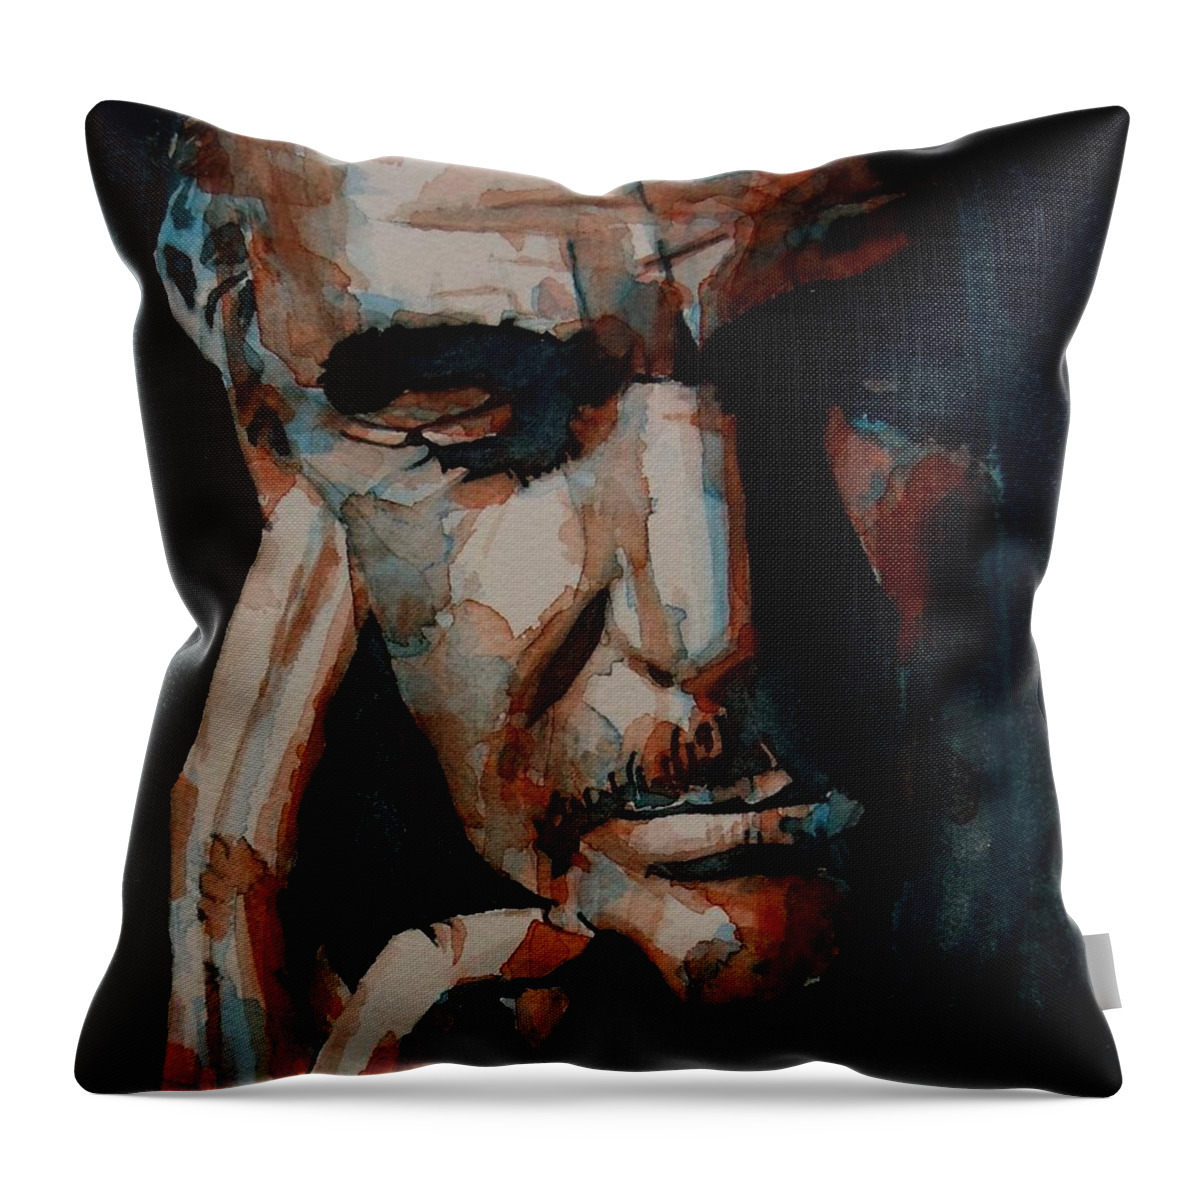 Sean Connery Throw Pillow featuring the painting Sean Connery by Paul Lovering